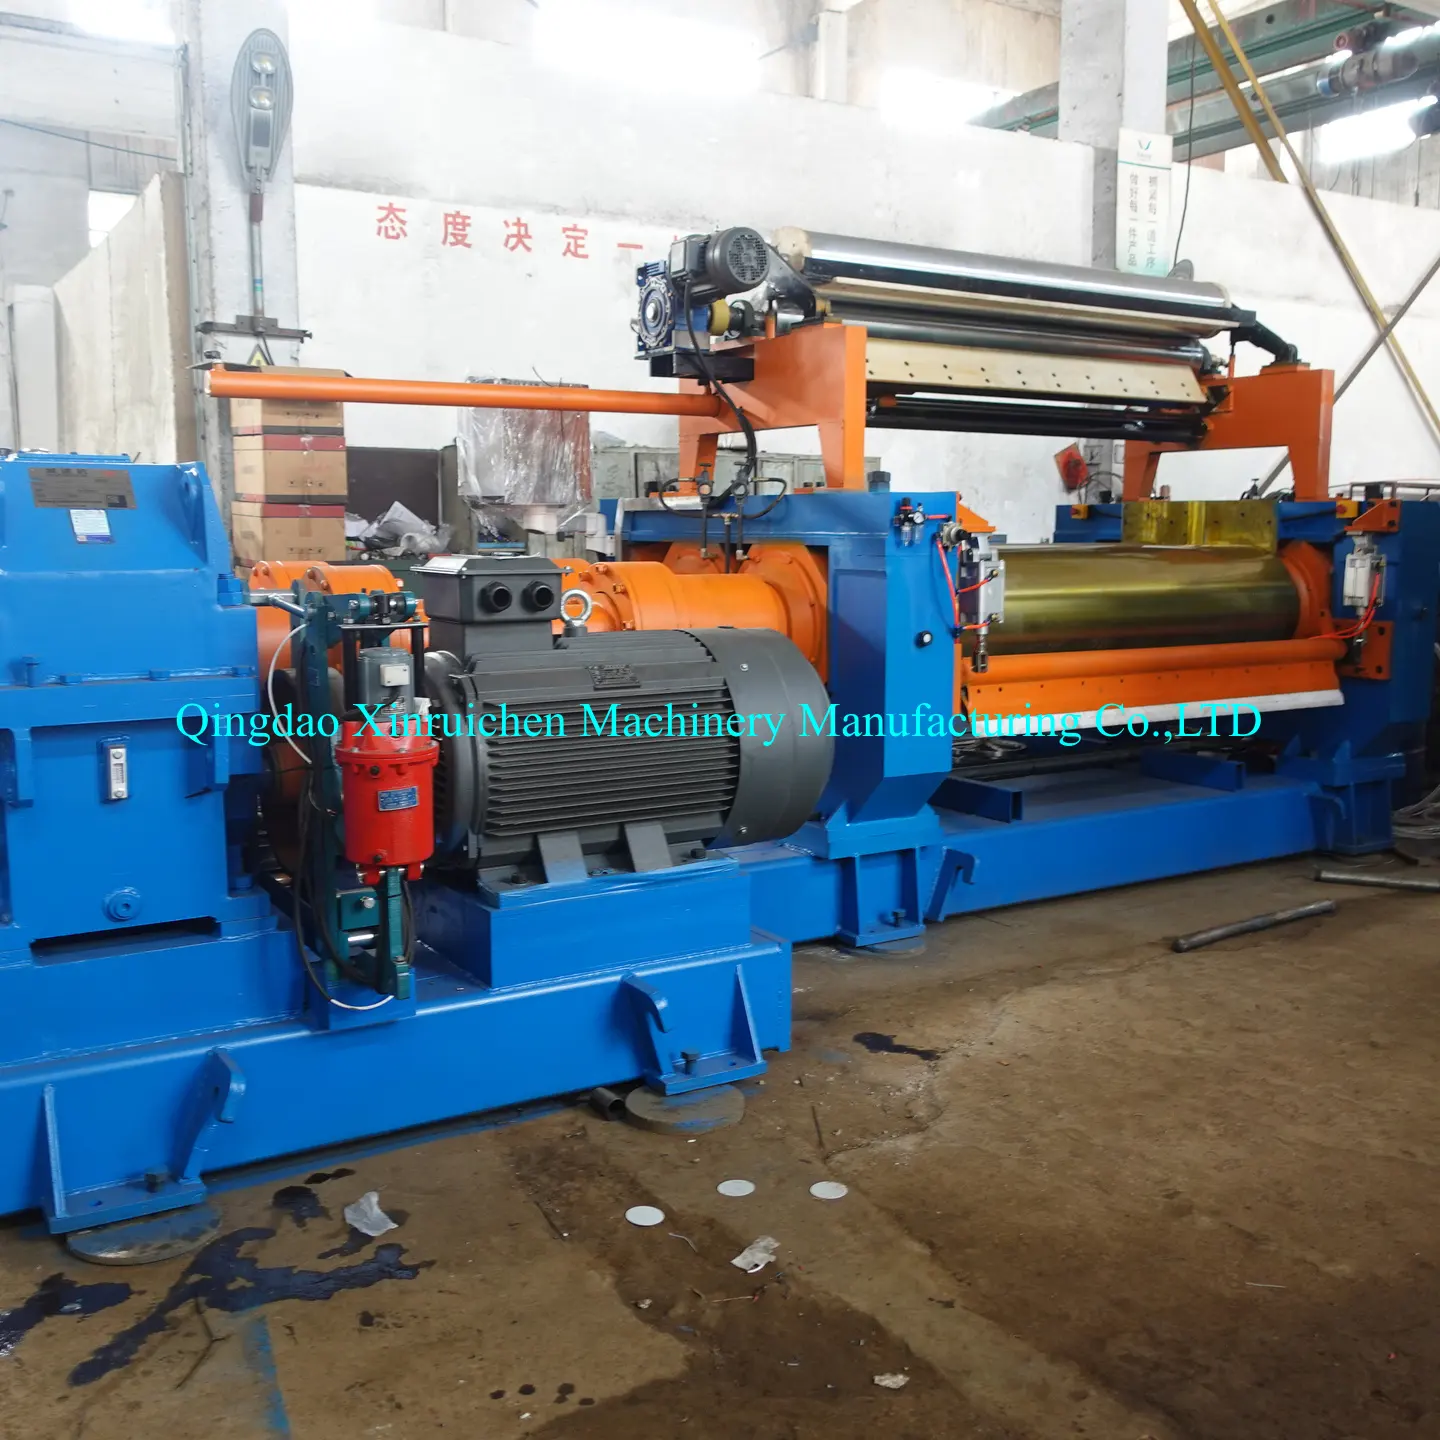 Ready stock rubber mixing mill machine,automatic two roll rubber mixer machinery,16 Inch silicone rubber roller machine